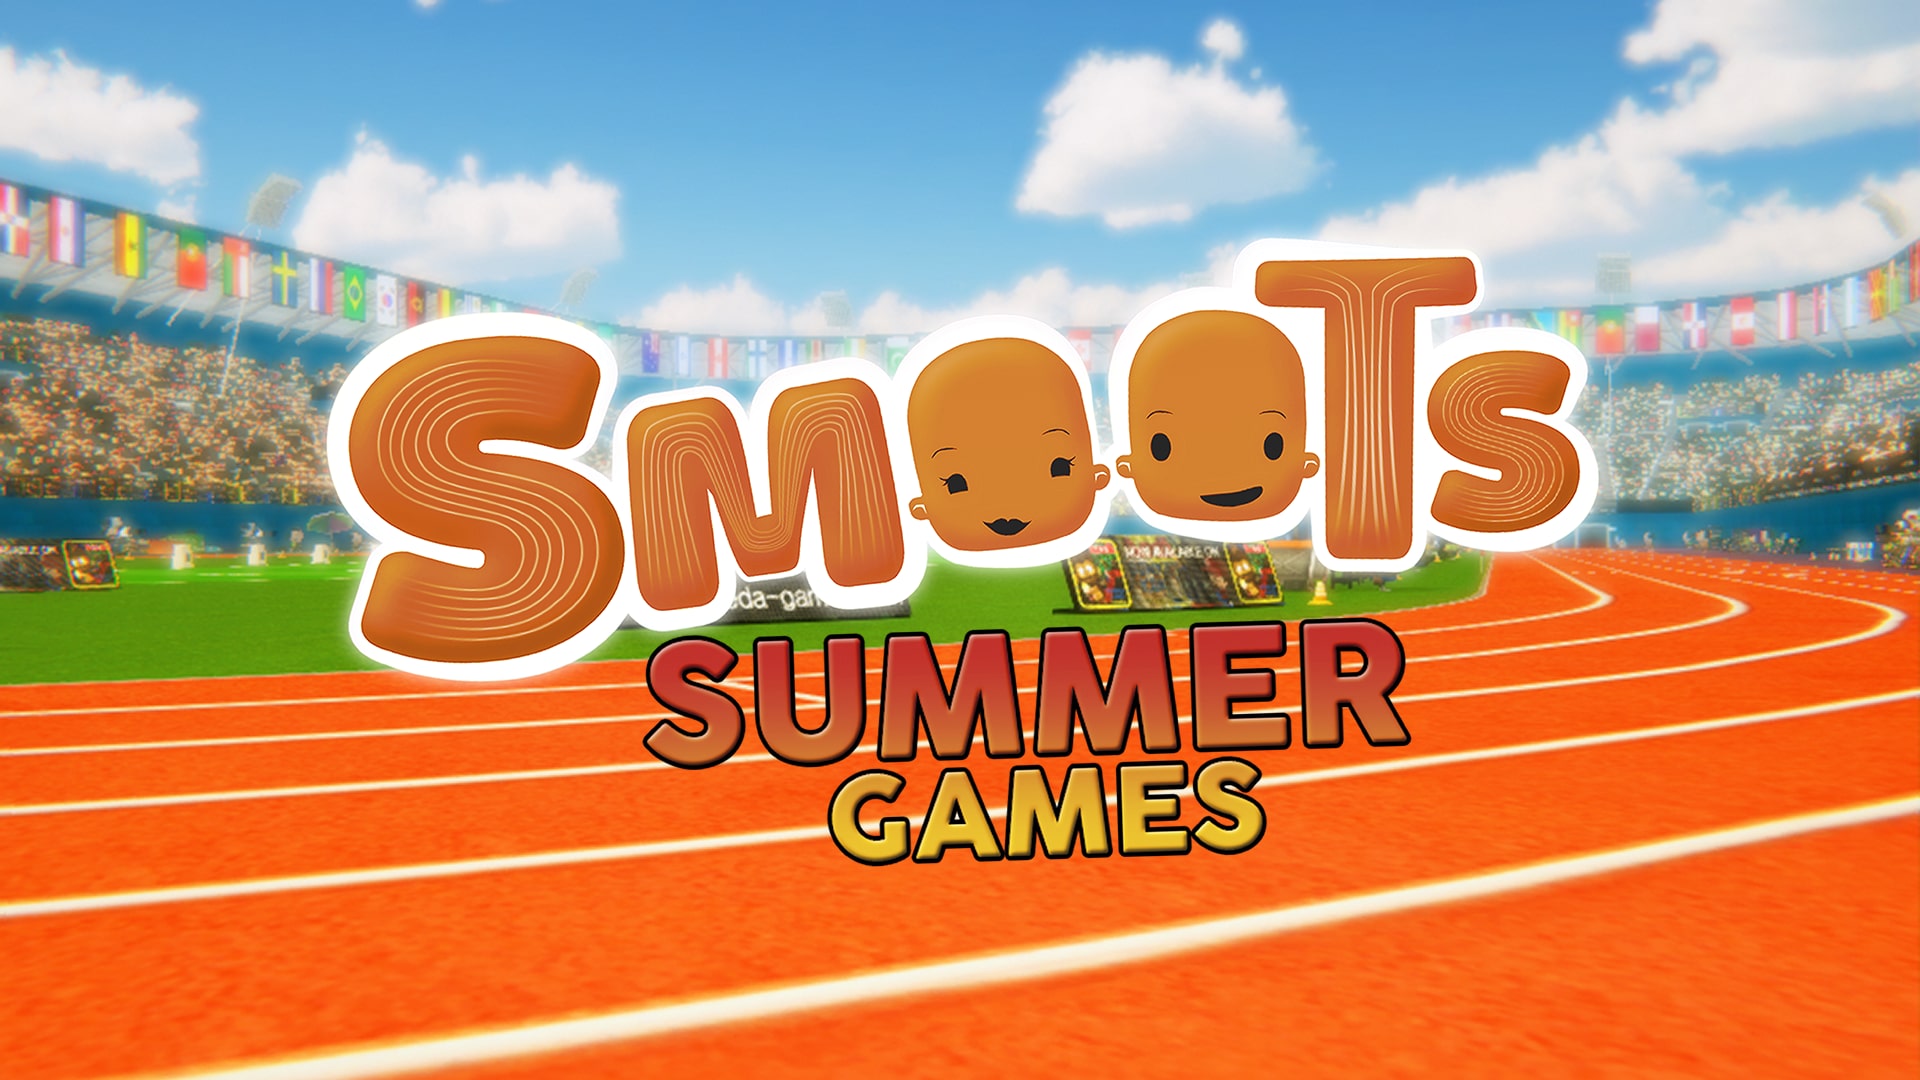 Smoots Summer Games on PS4 — price history, screenshots, discounts • USA